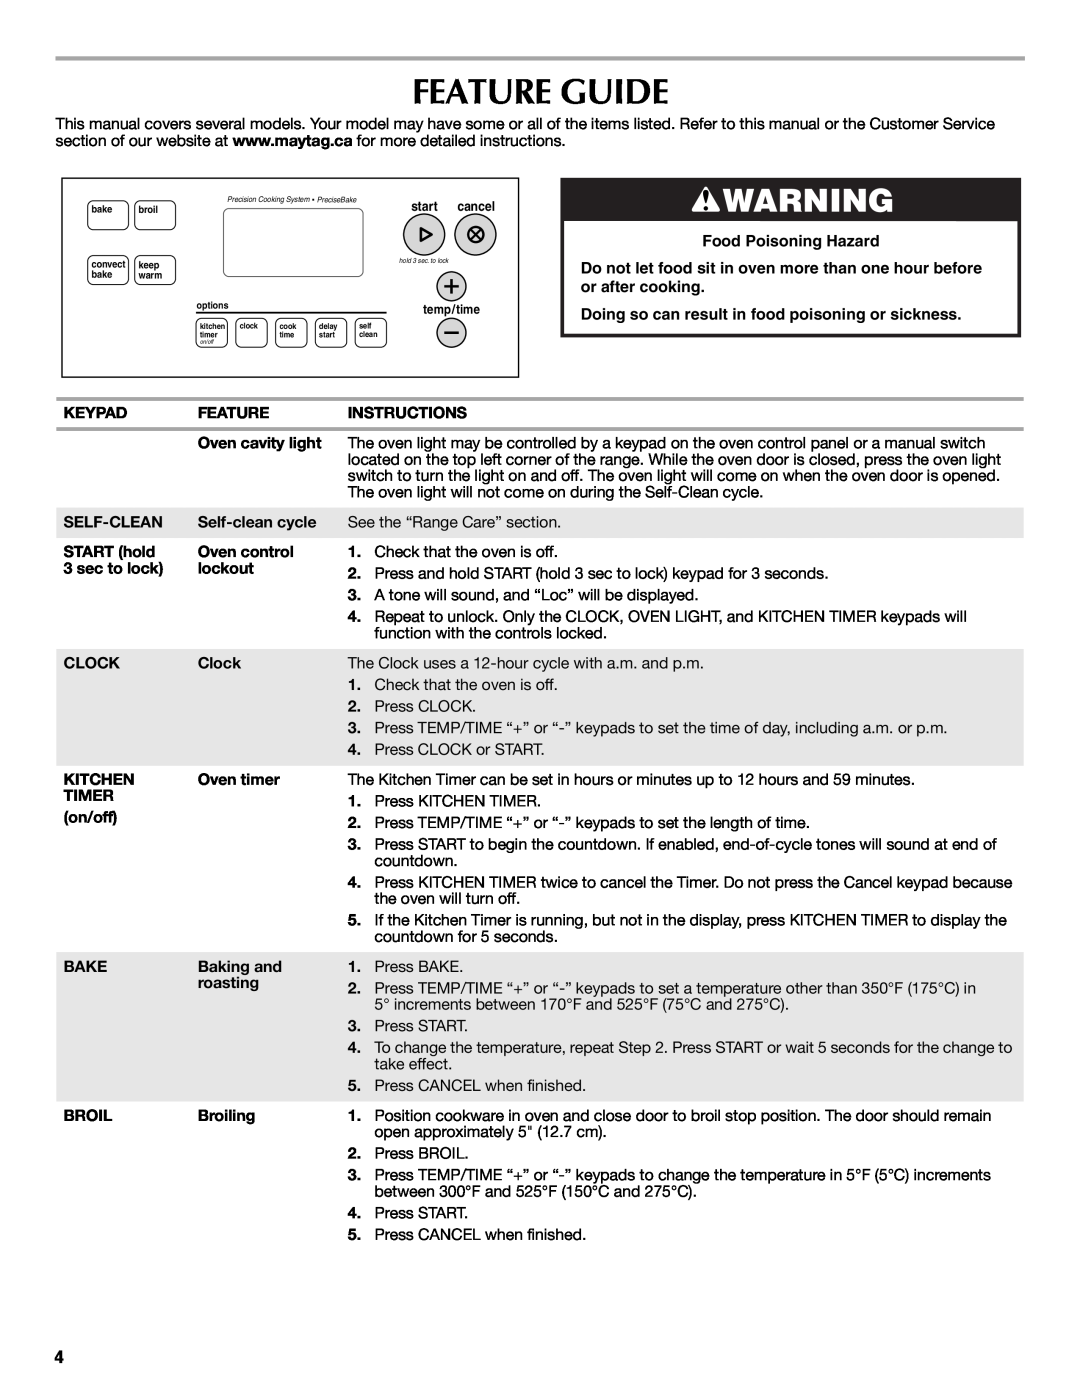 Whirlpool W10234647A warranty Feature Guide, Food Poisoning Hazard, Doing so can result in food poisoning or sickness 